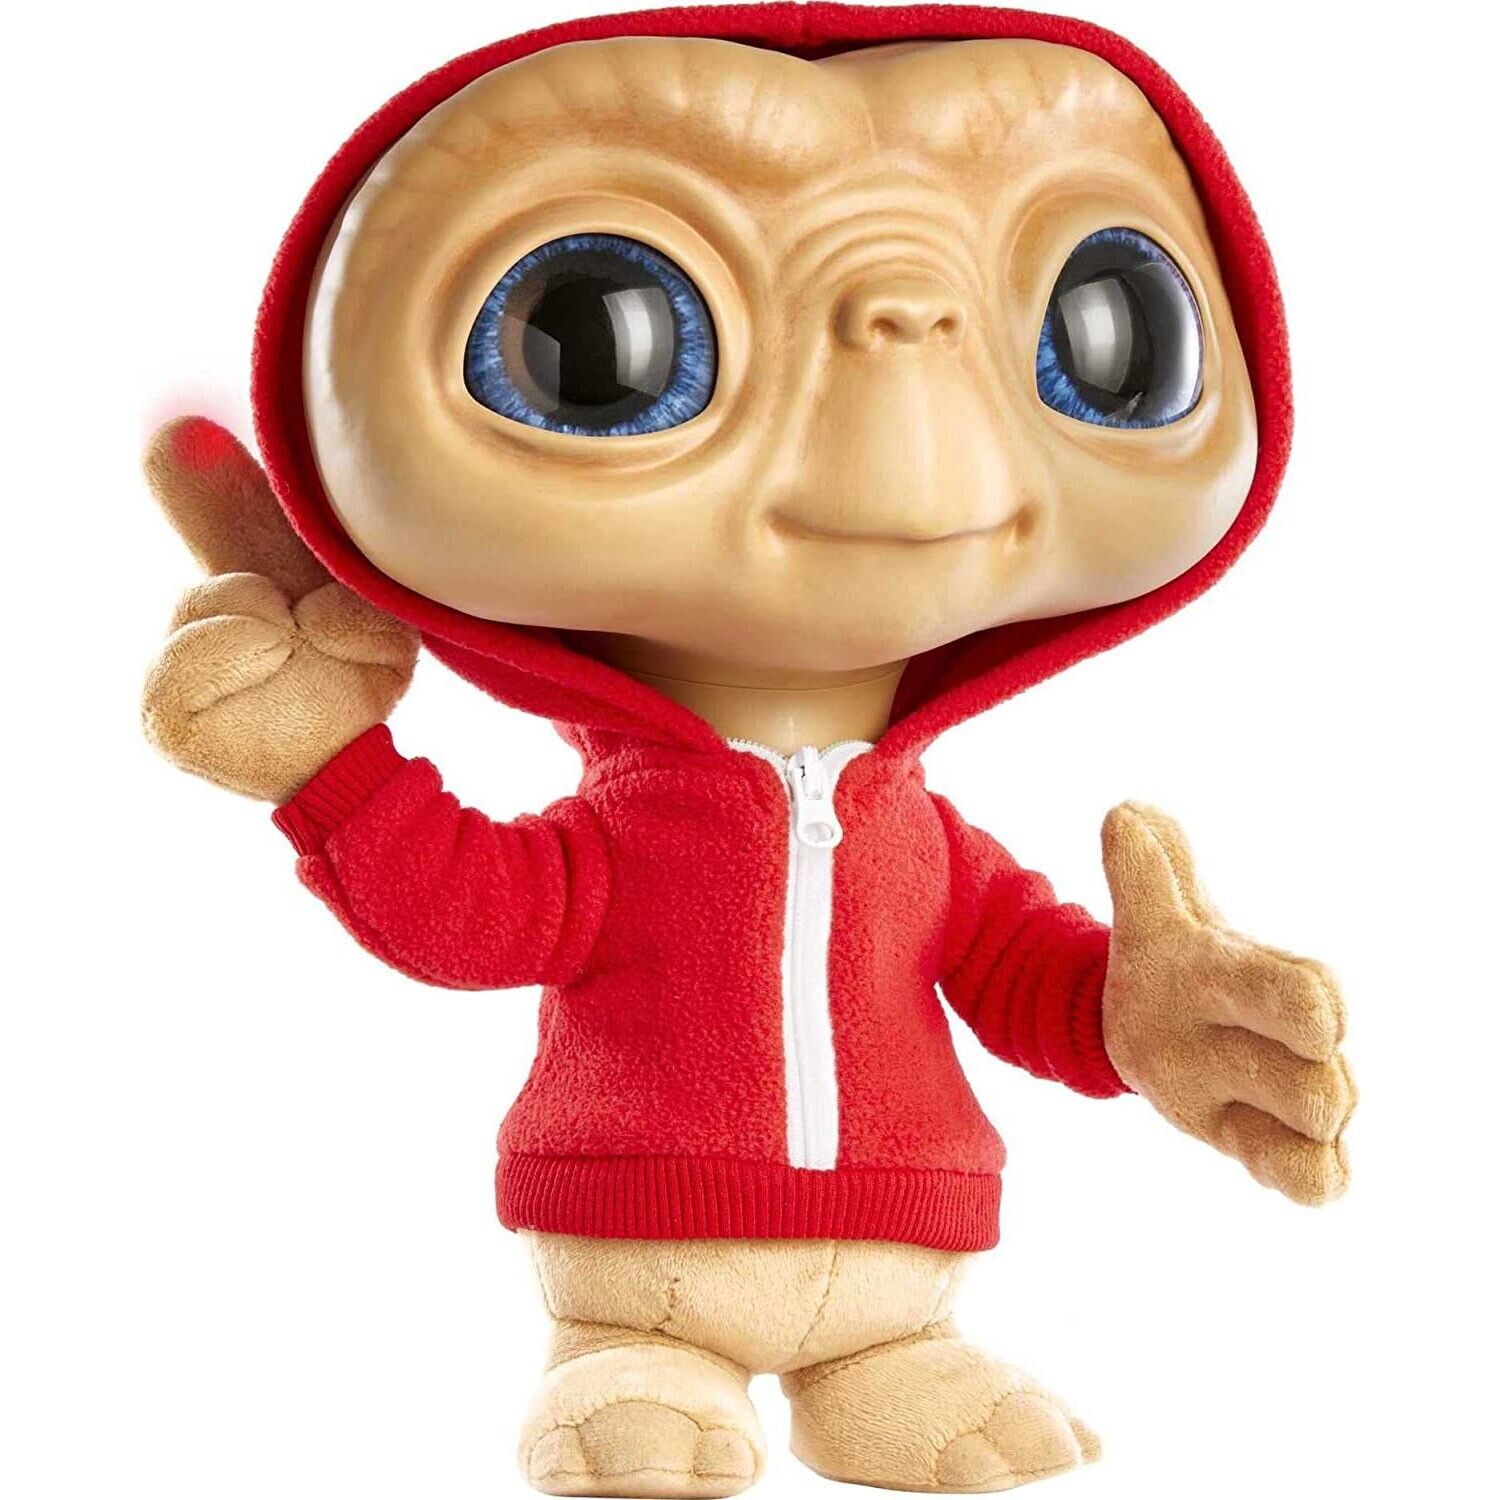 E.T. 40th Anniversary Plush w/ Lights & Sounds - Collectible Toy for Fans